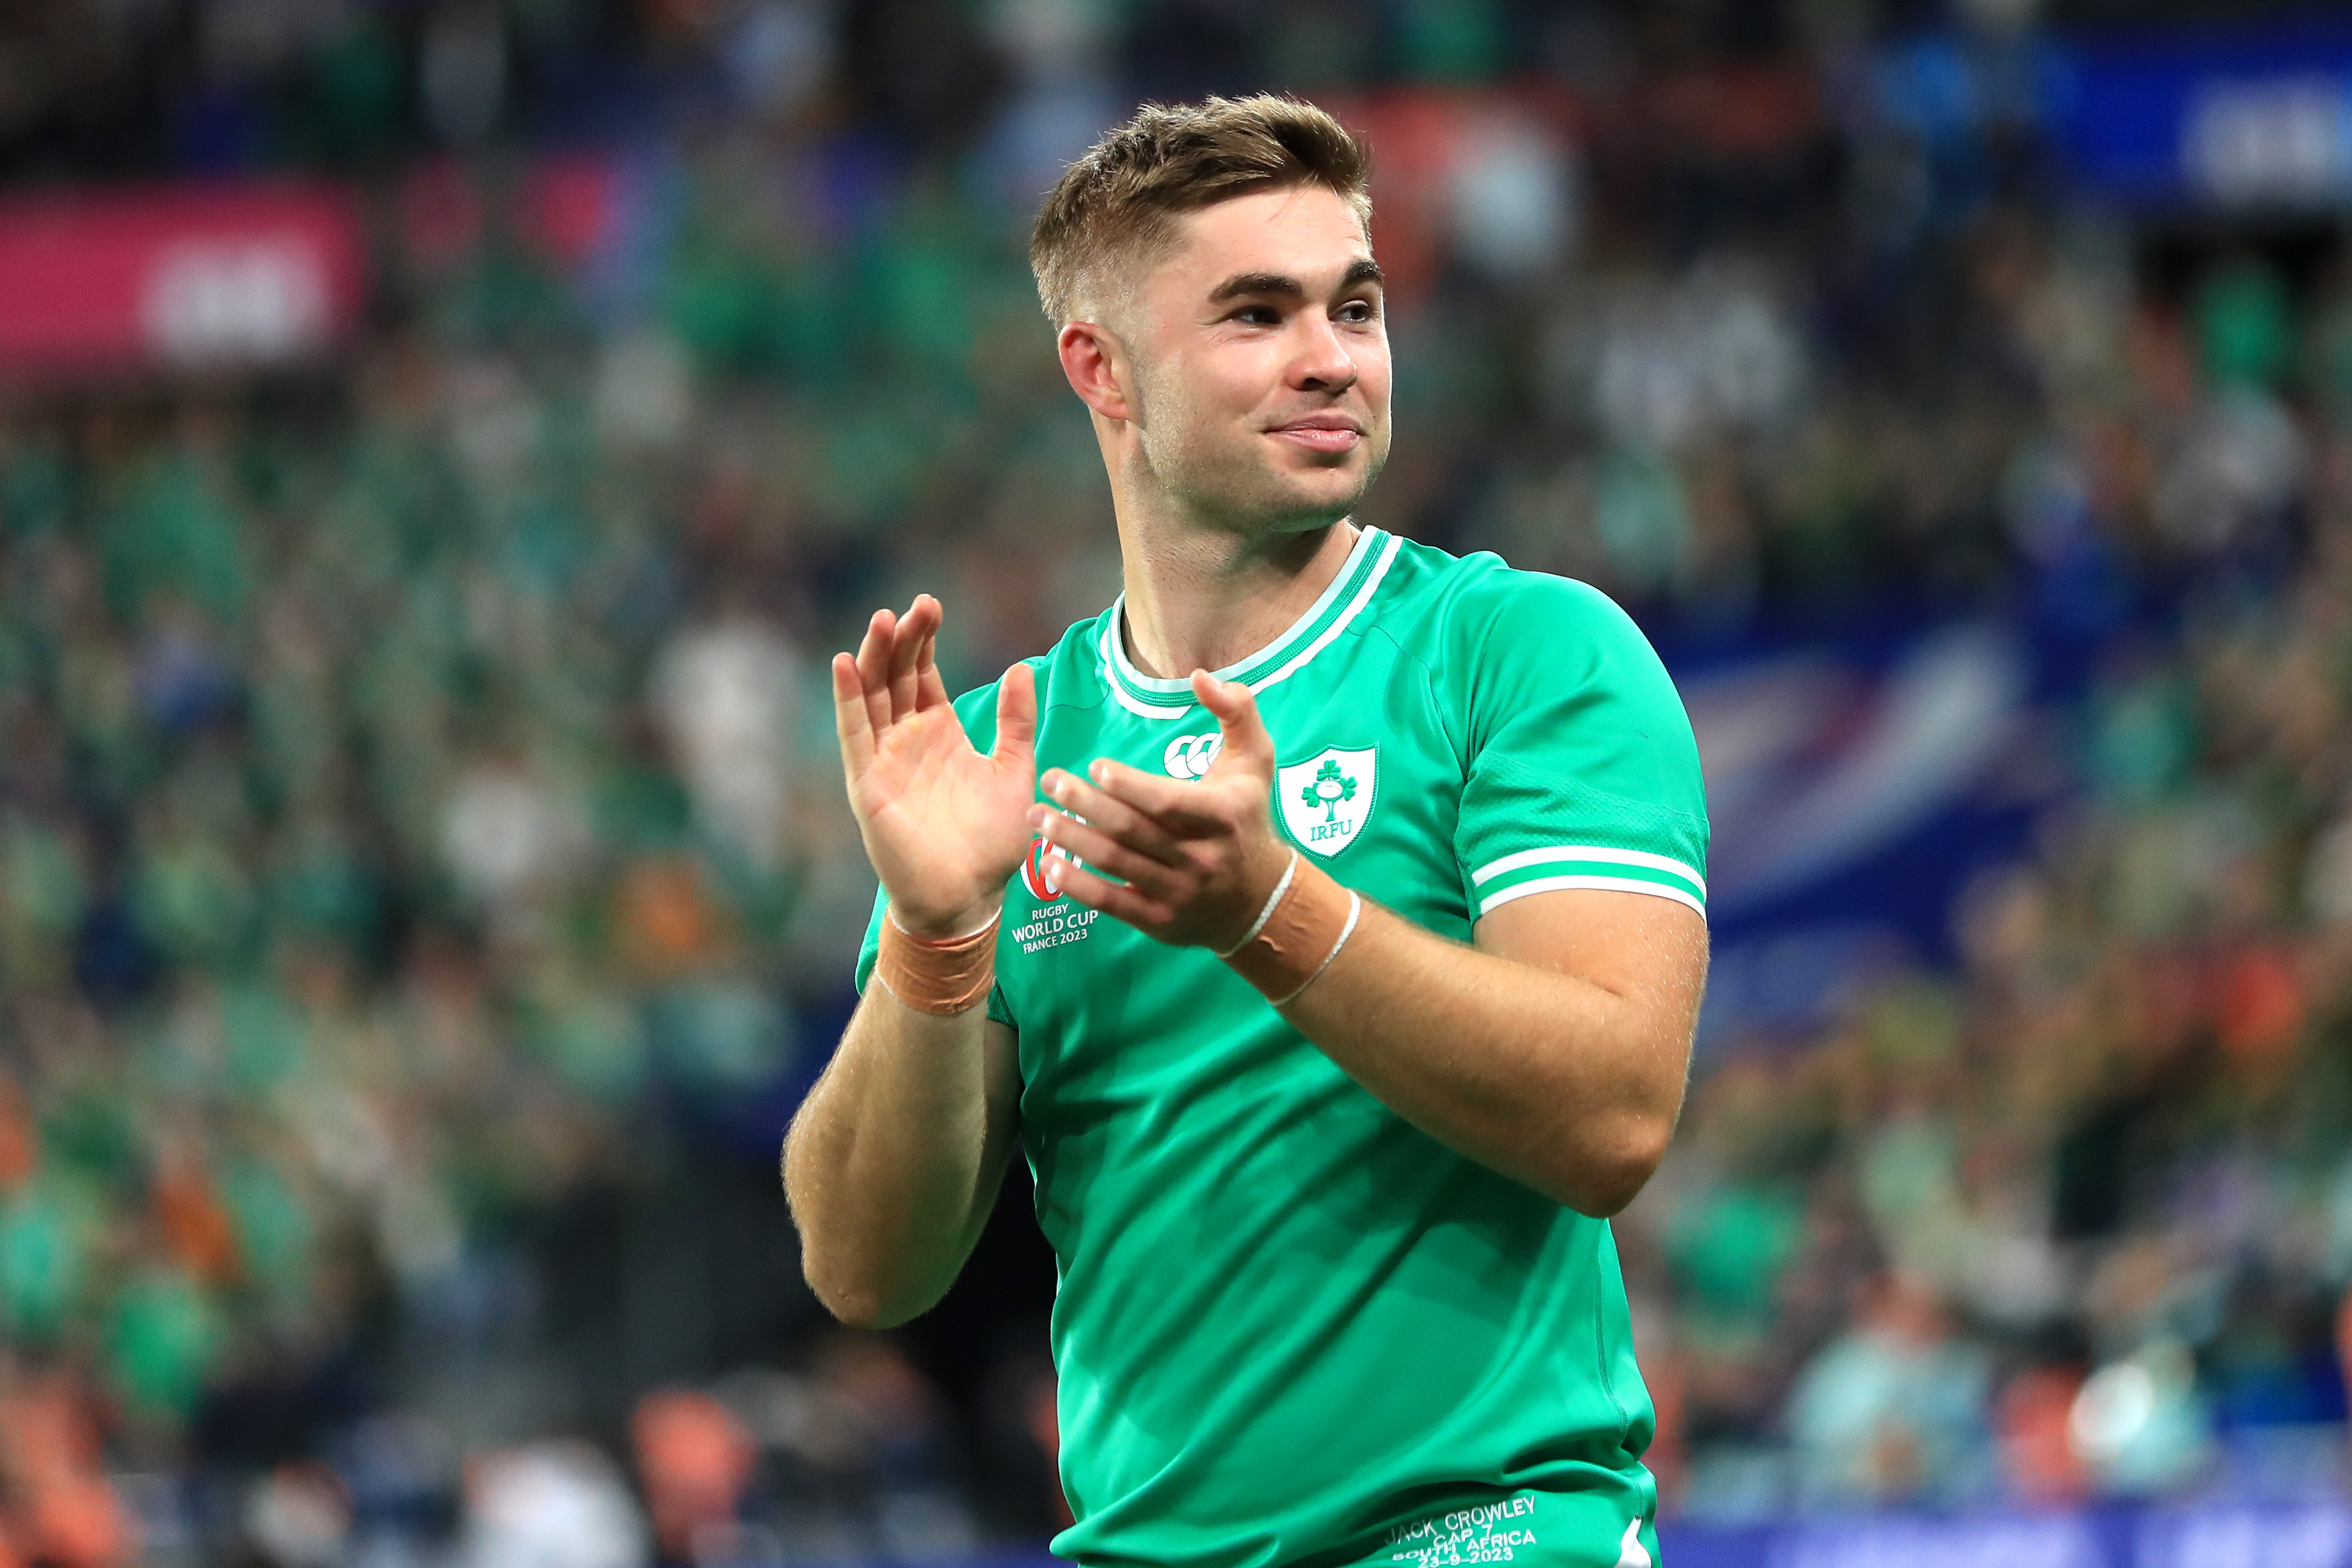 Jack Crowley will start at fly-half for Ireland